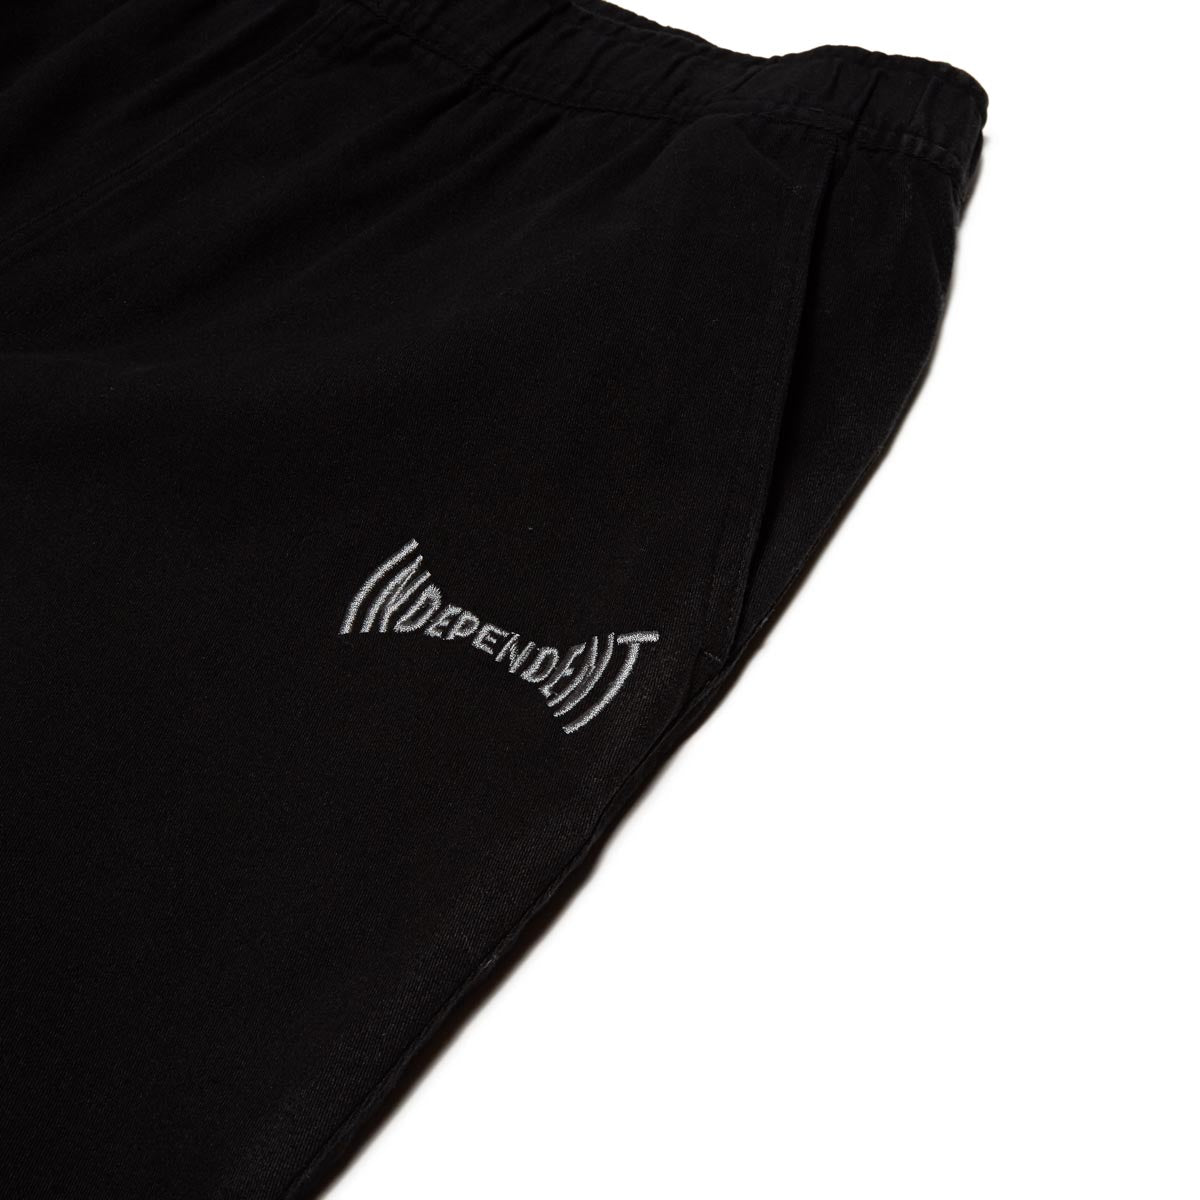 Independent Span Pull On Shorts - Black image 4